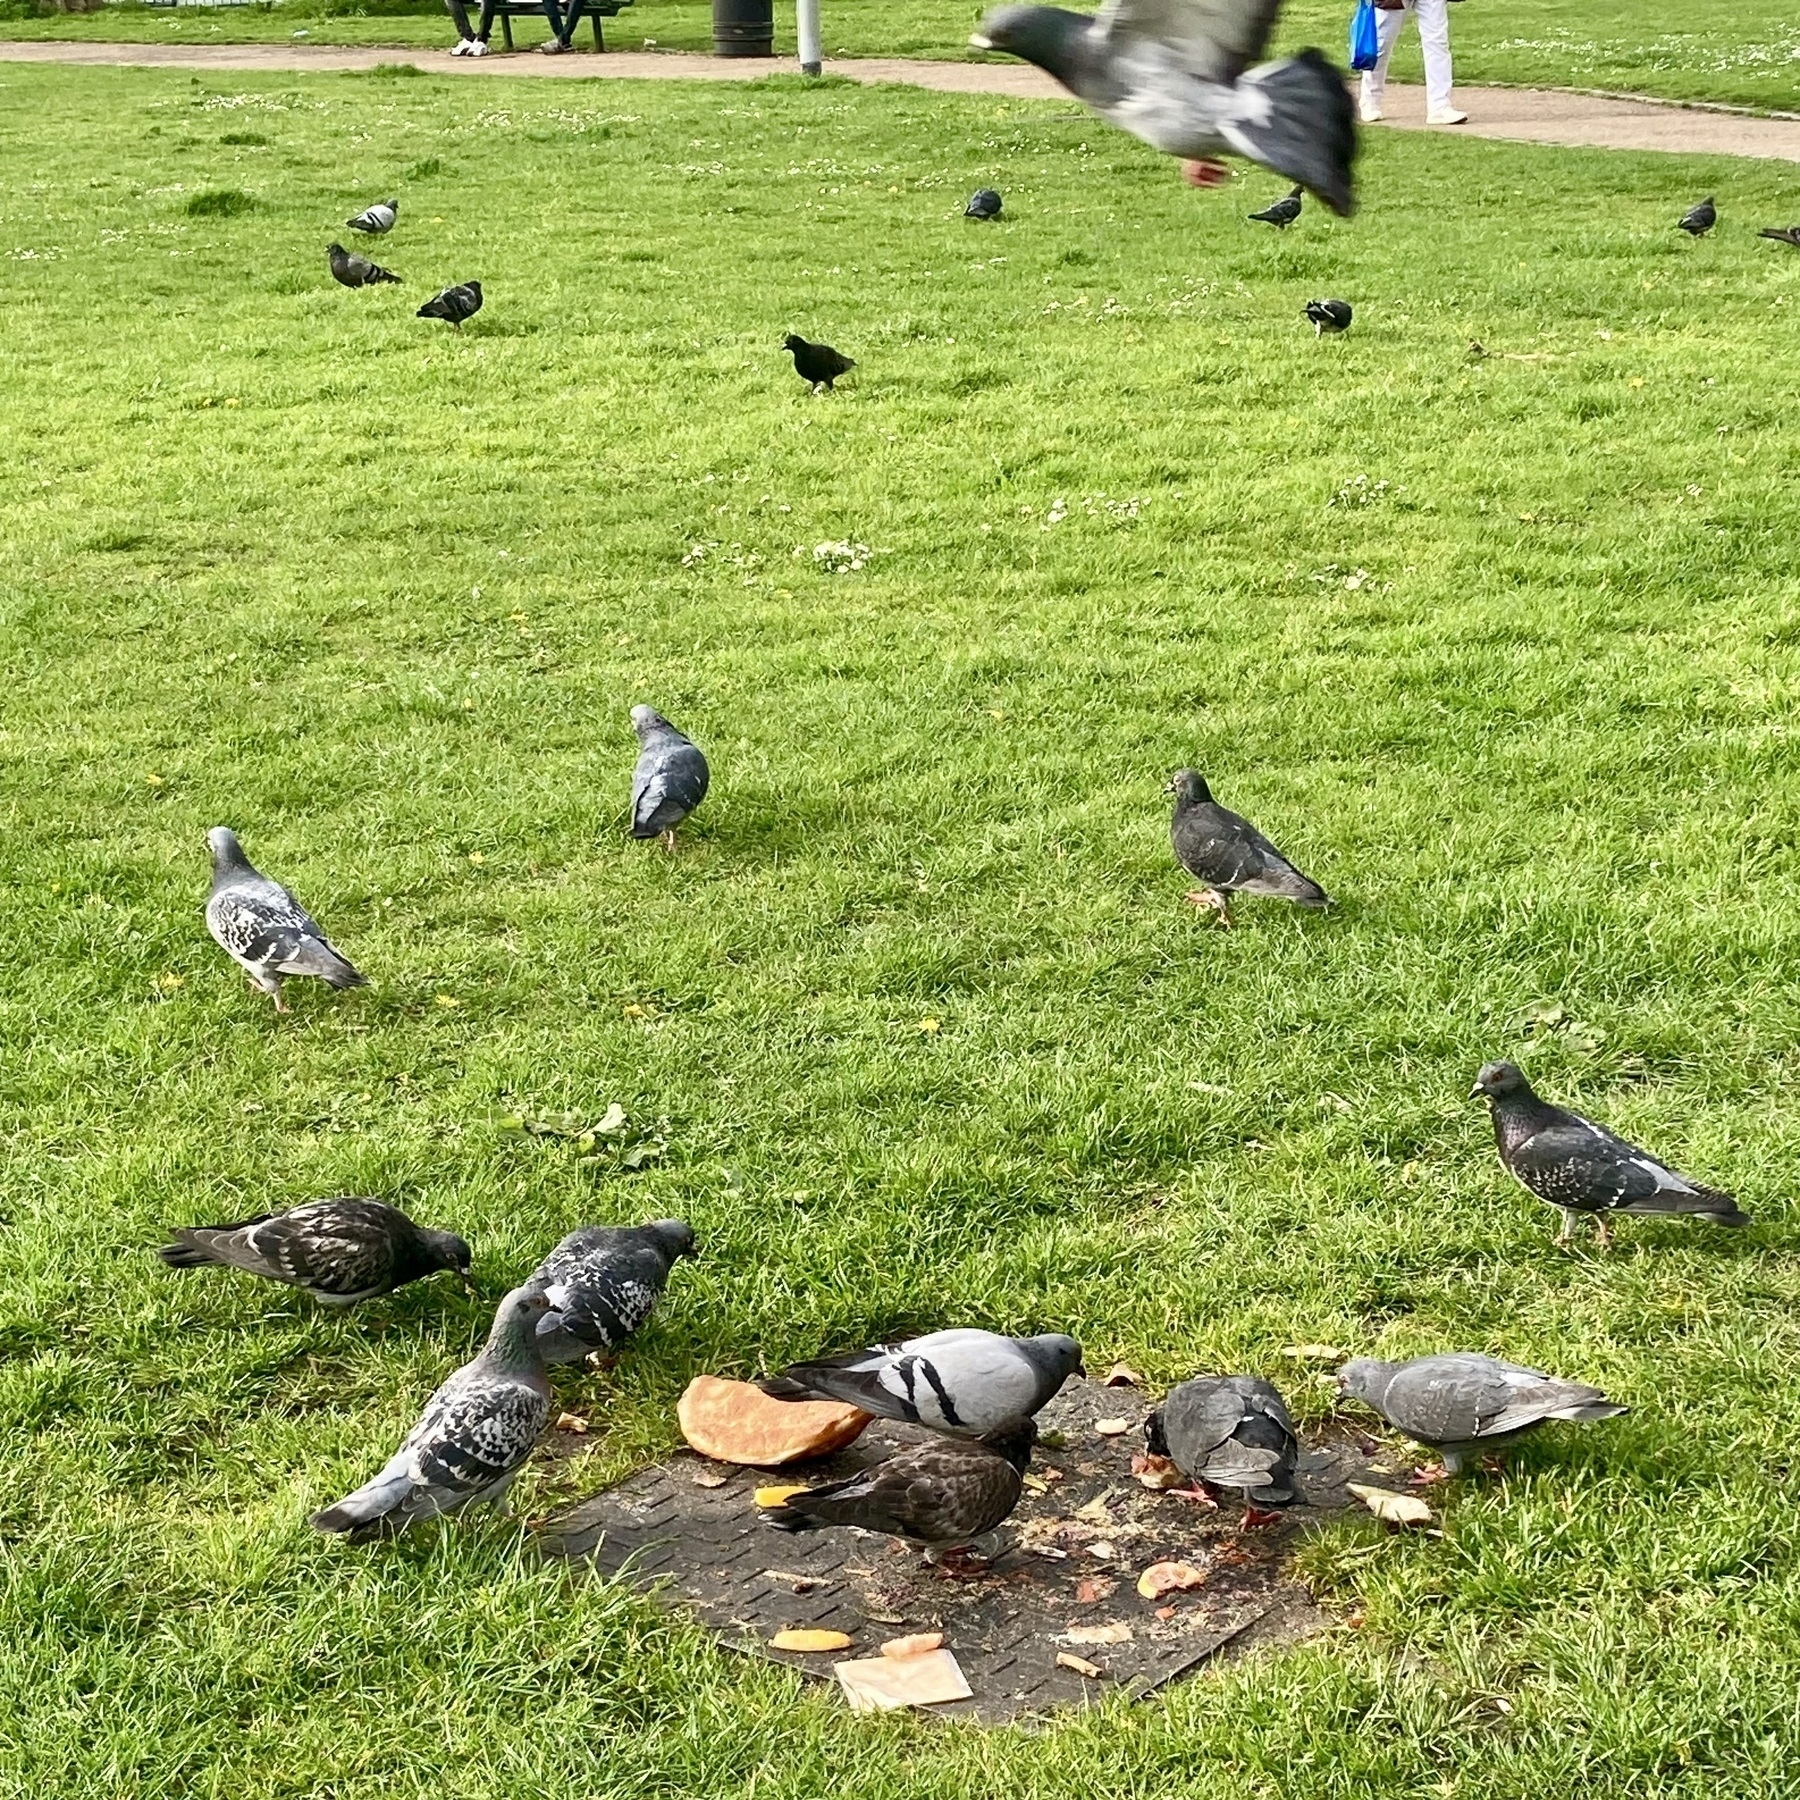 Urban pigeons on a drain cover in a park eat discarded naan bread and curry - one bird flies into the shot